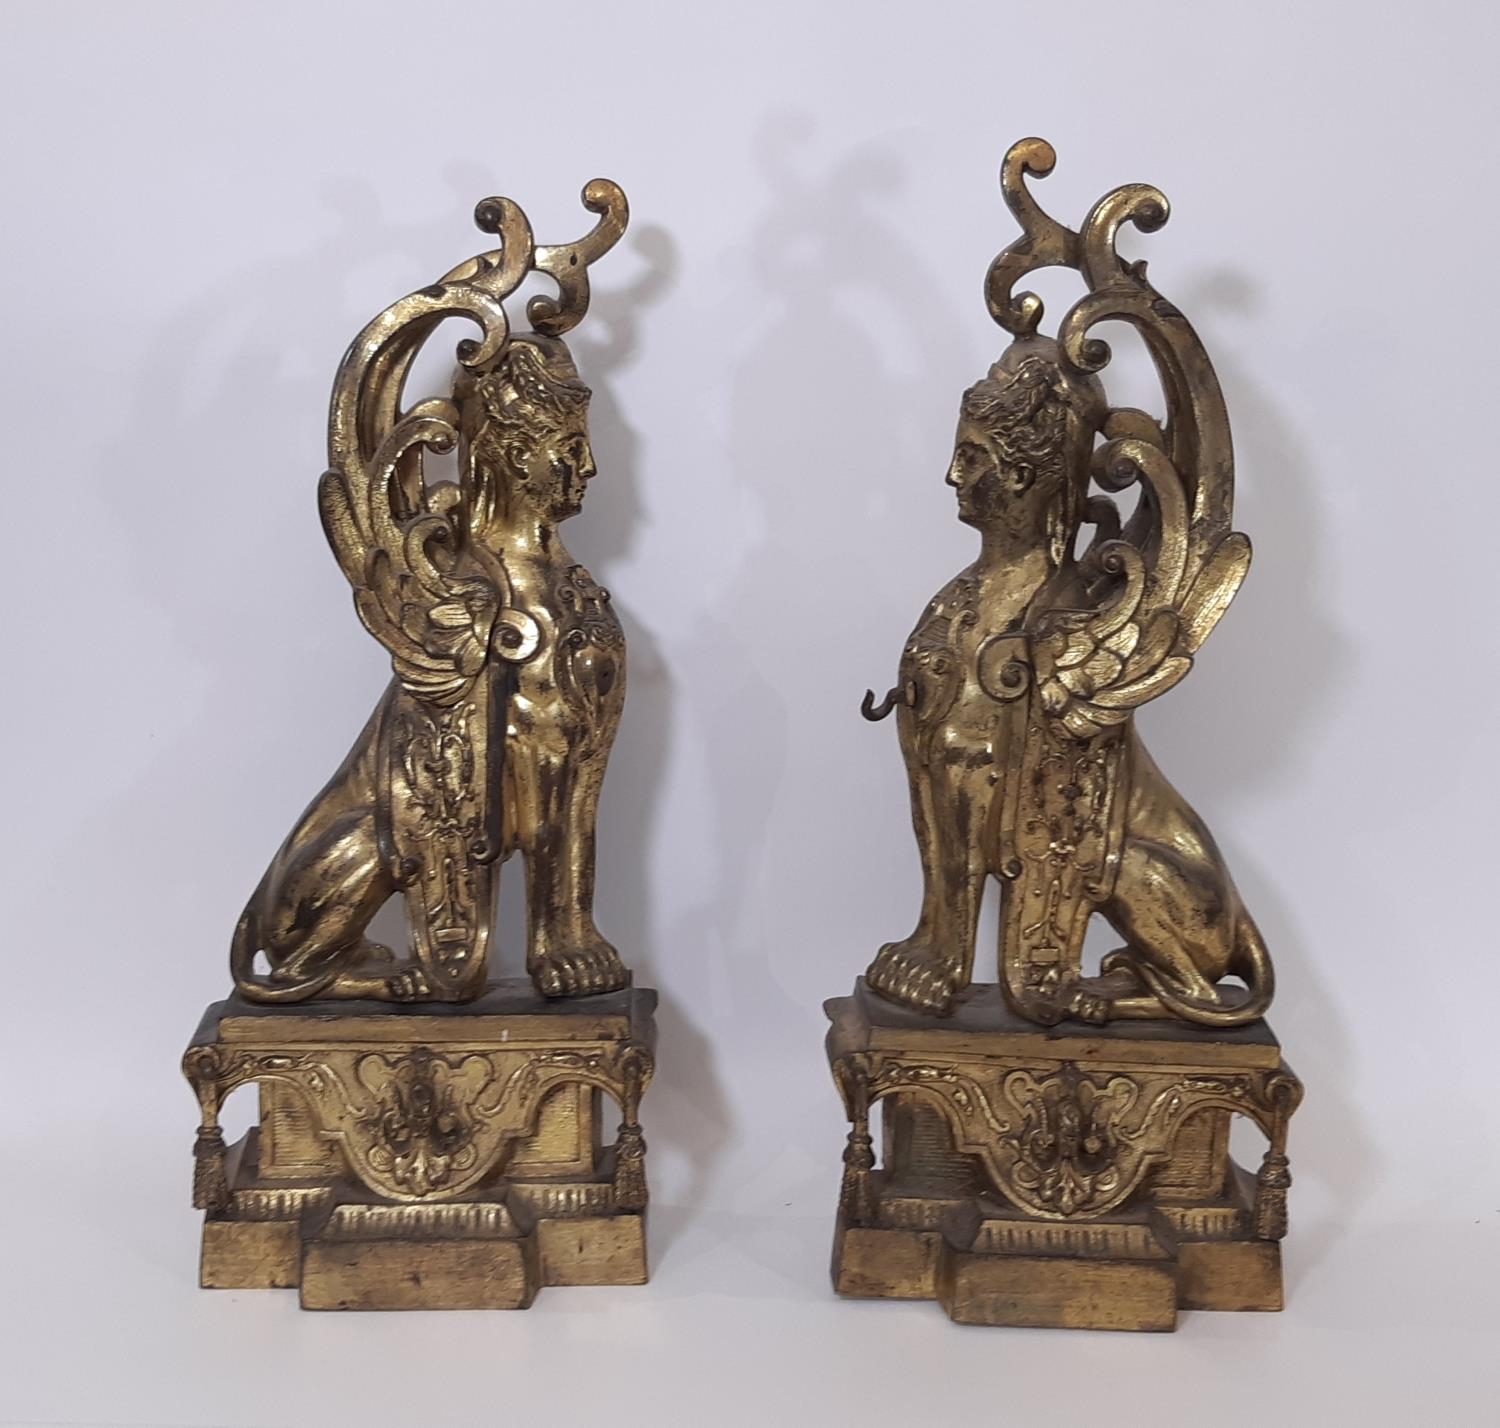 A substantial pair of 19th century cast gilt brass and ormolu fire dogs / figures in the form of